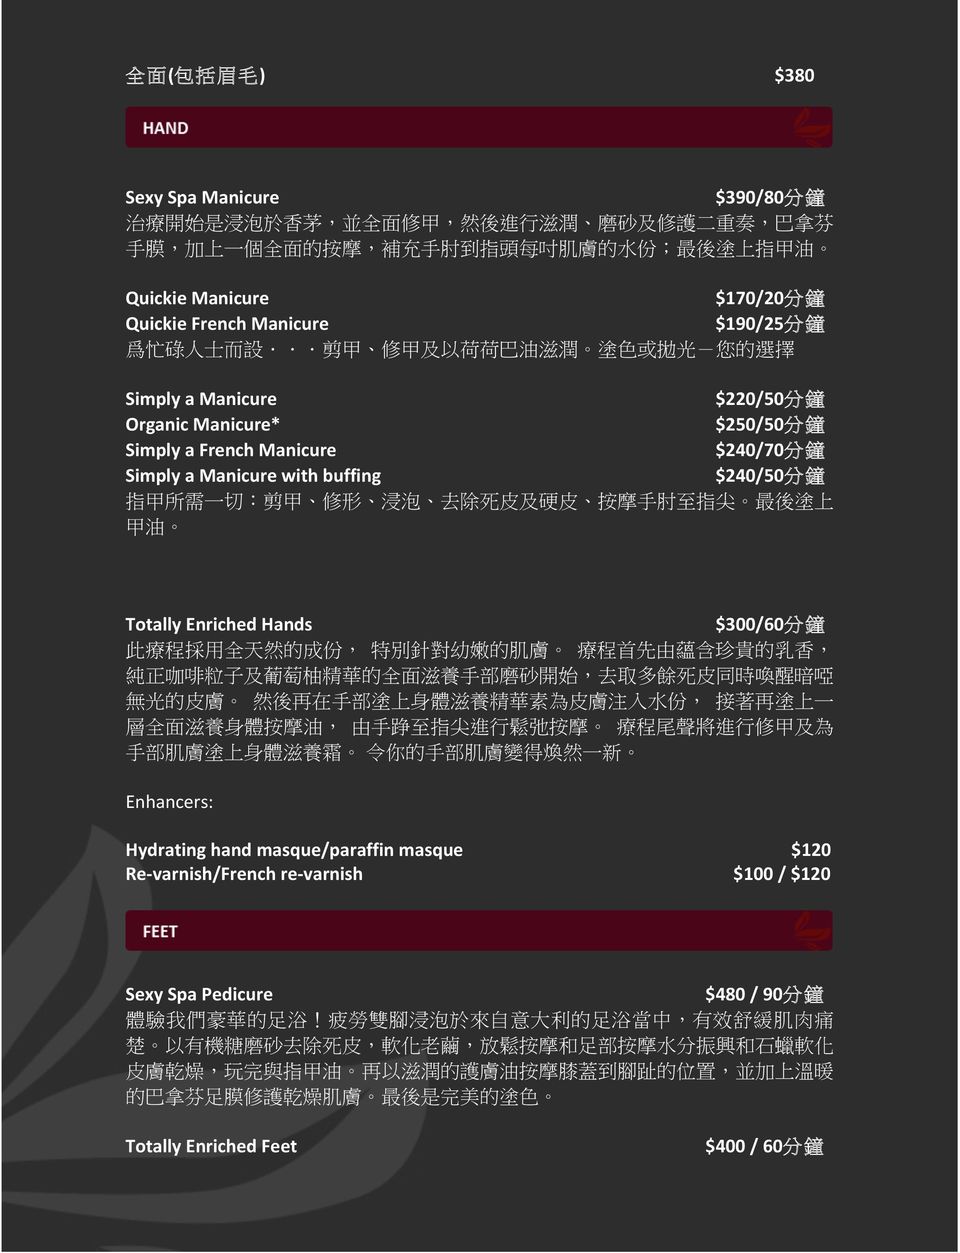 buffing $240/50 Totally Enriched Hands $300/60 踭 Enhancers: Hydrating hand masque/paraffin masque Re-